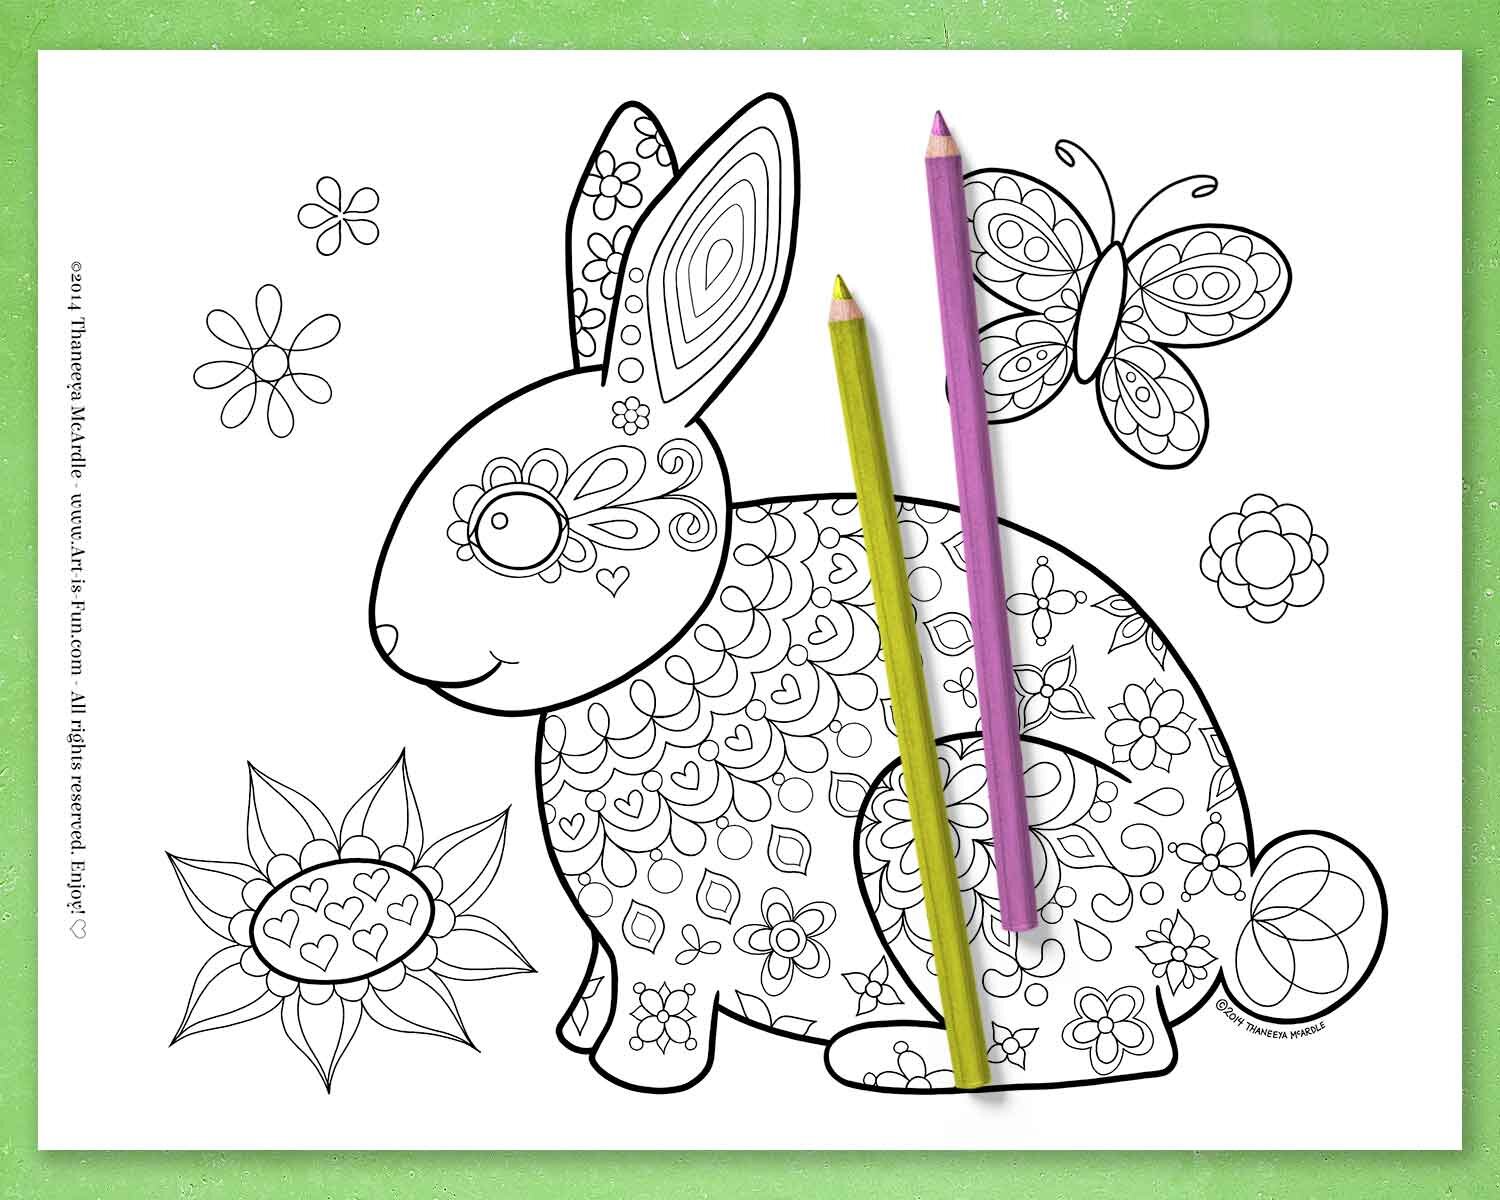 Groovy Animals Coloring Pages   Fun Printable E Book of 21 ...